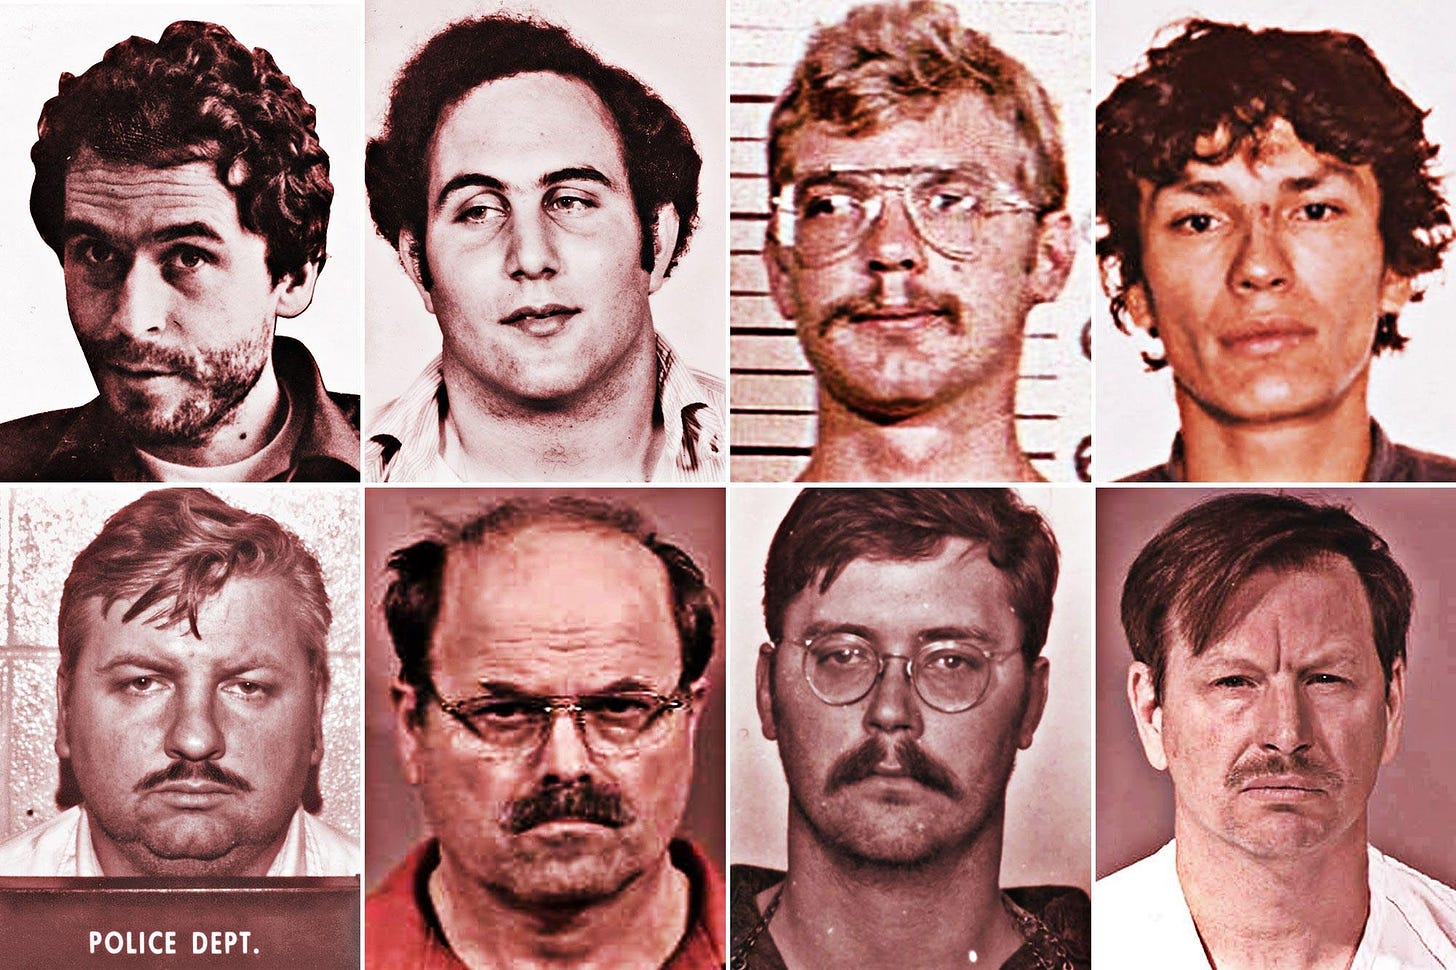 Some notorious serial killers in US